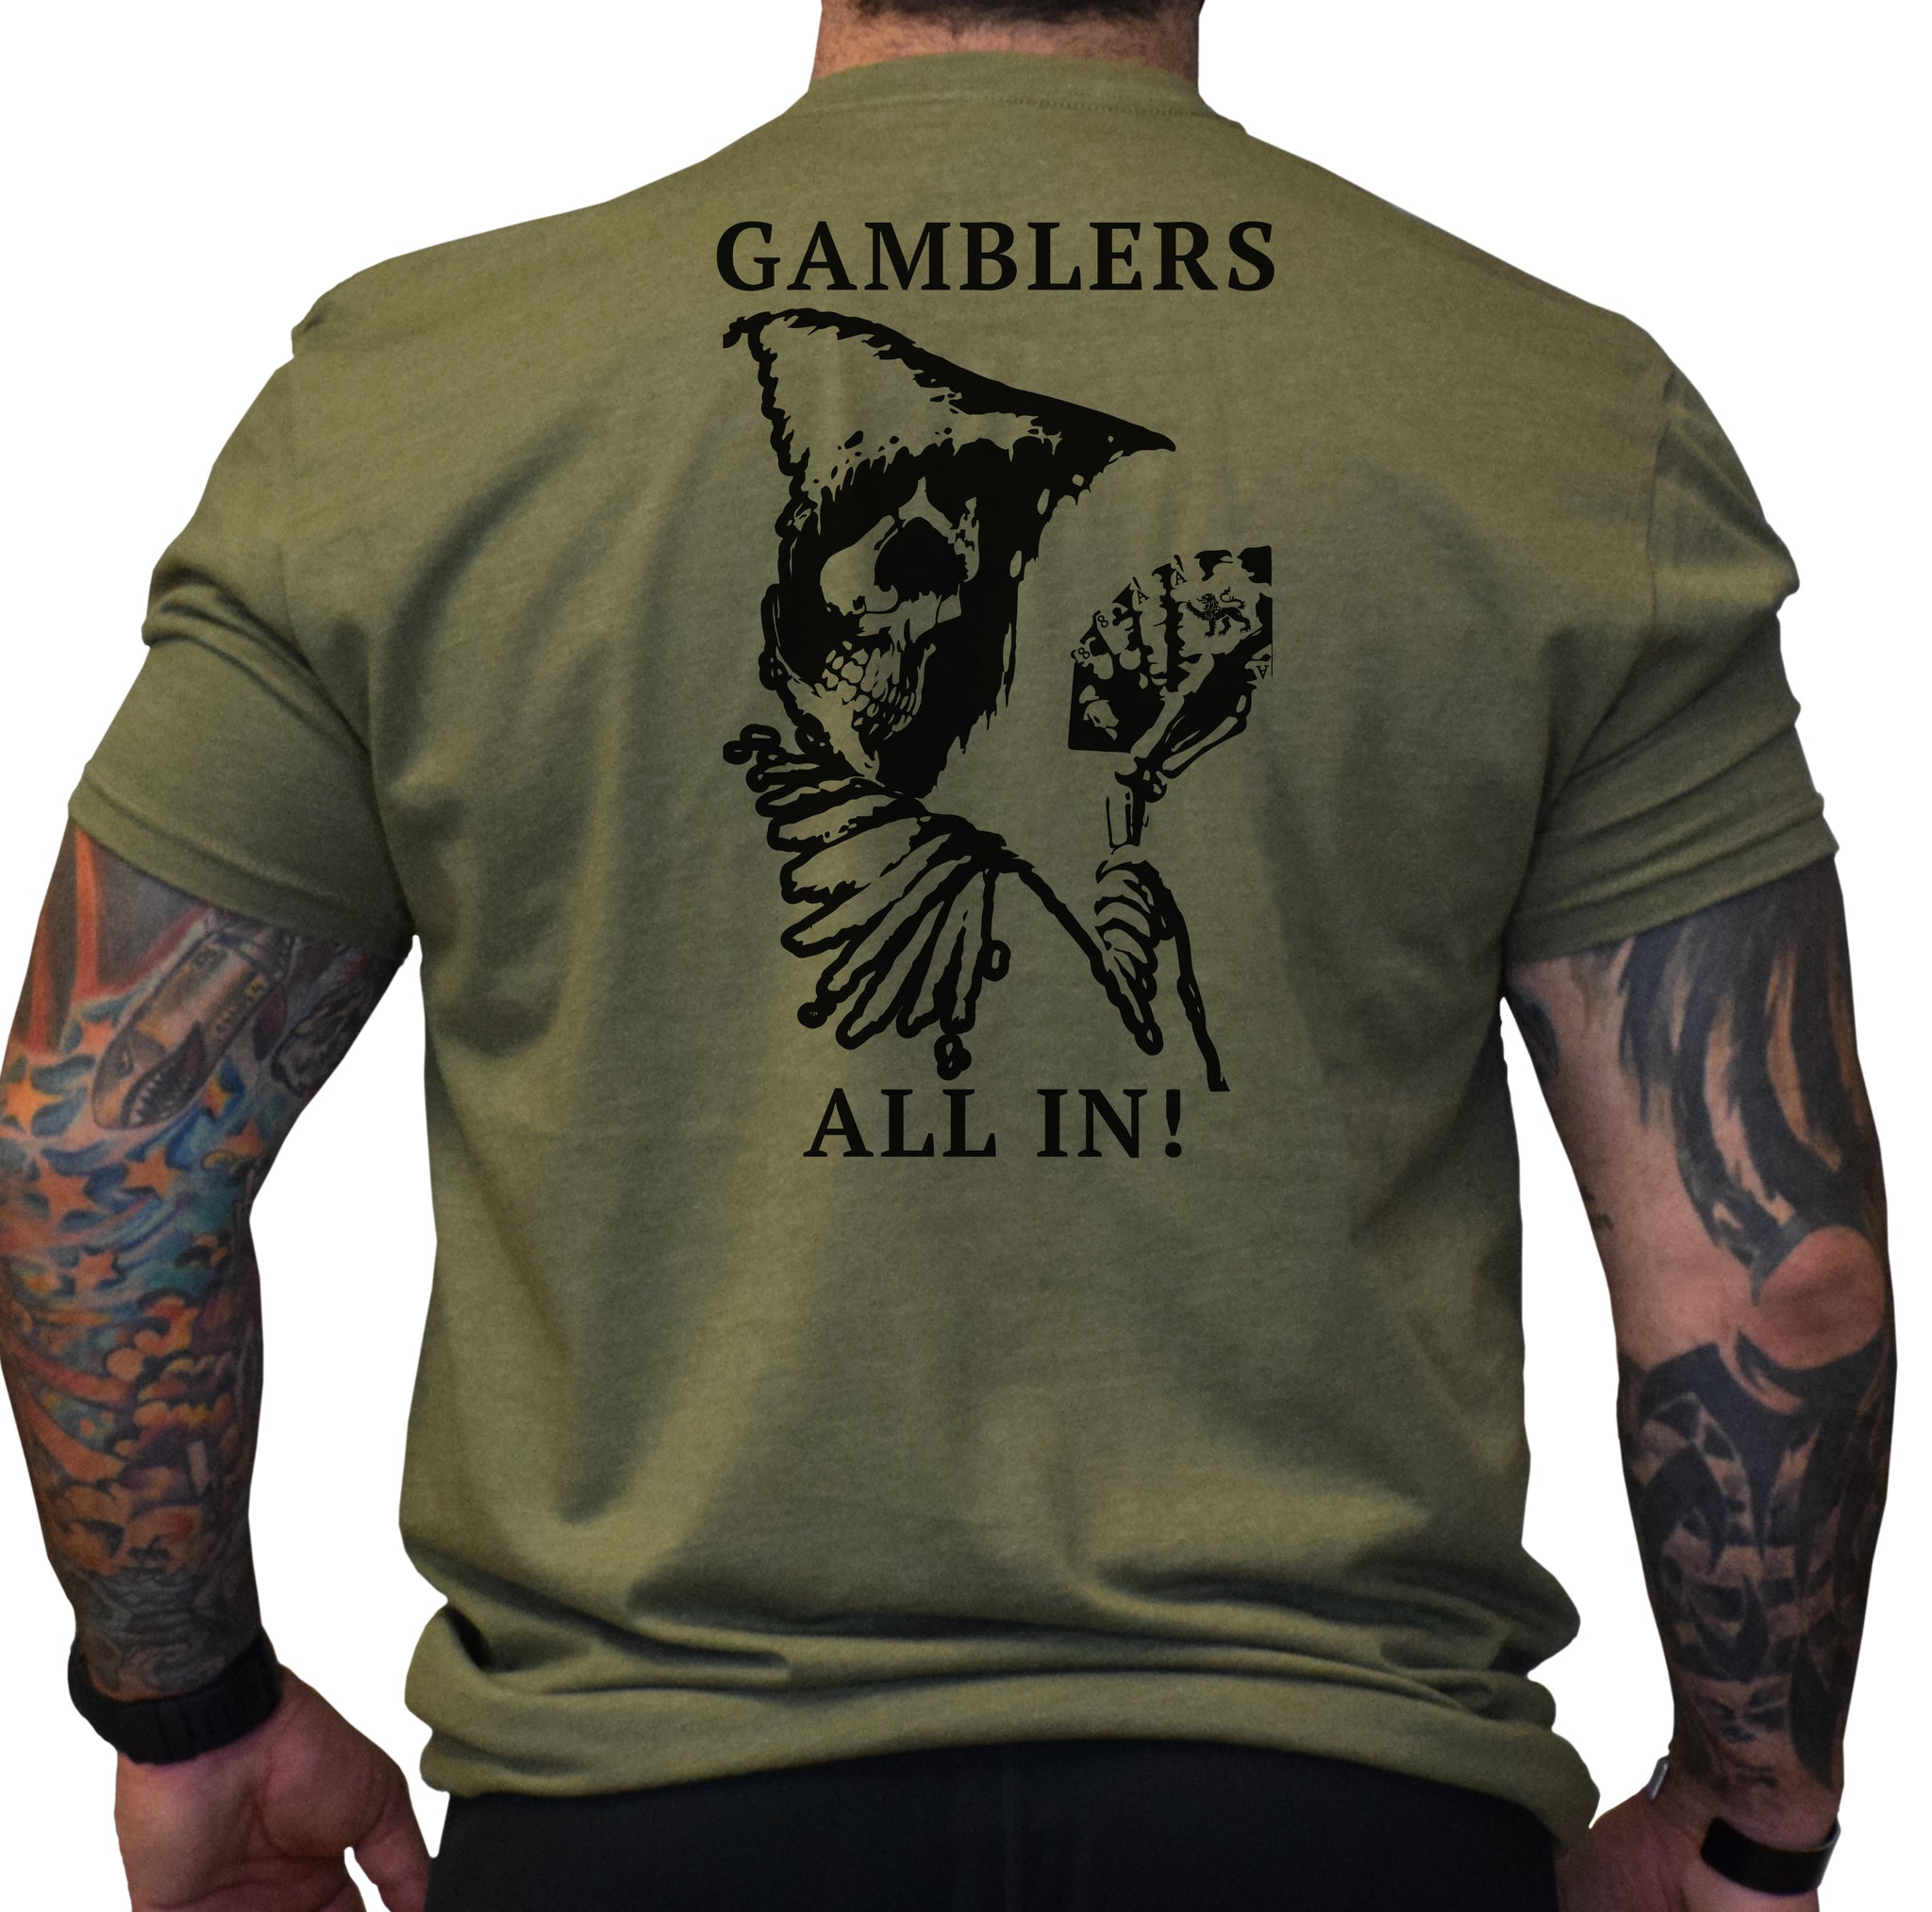 GCO - 1/68 Gamblers - All In!